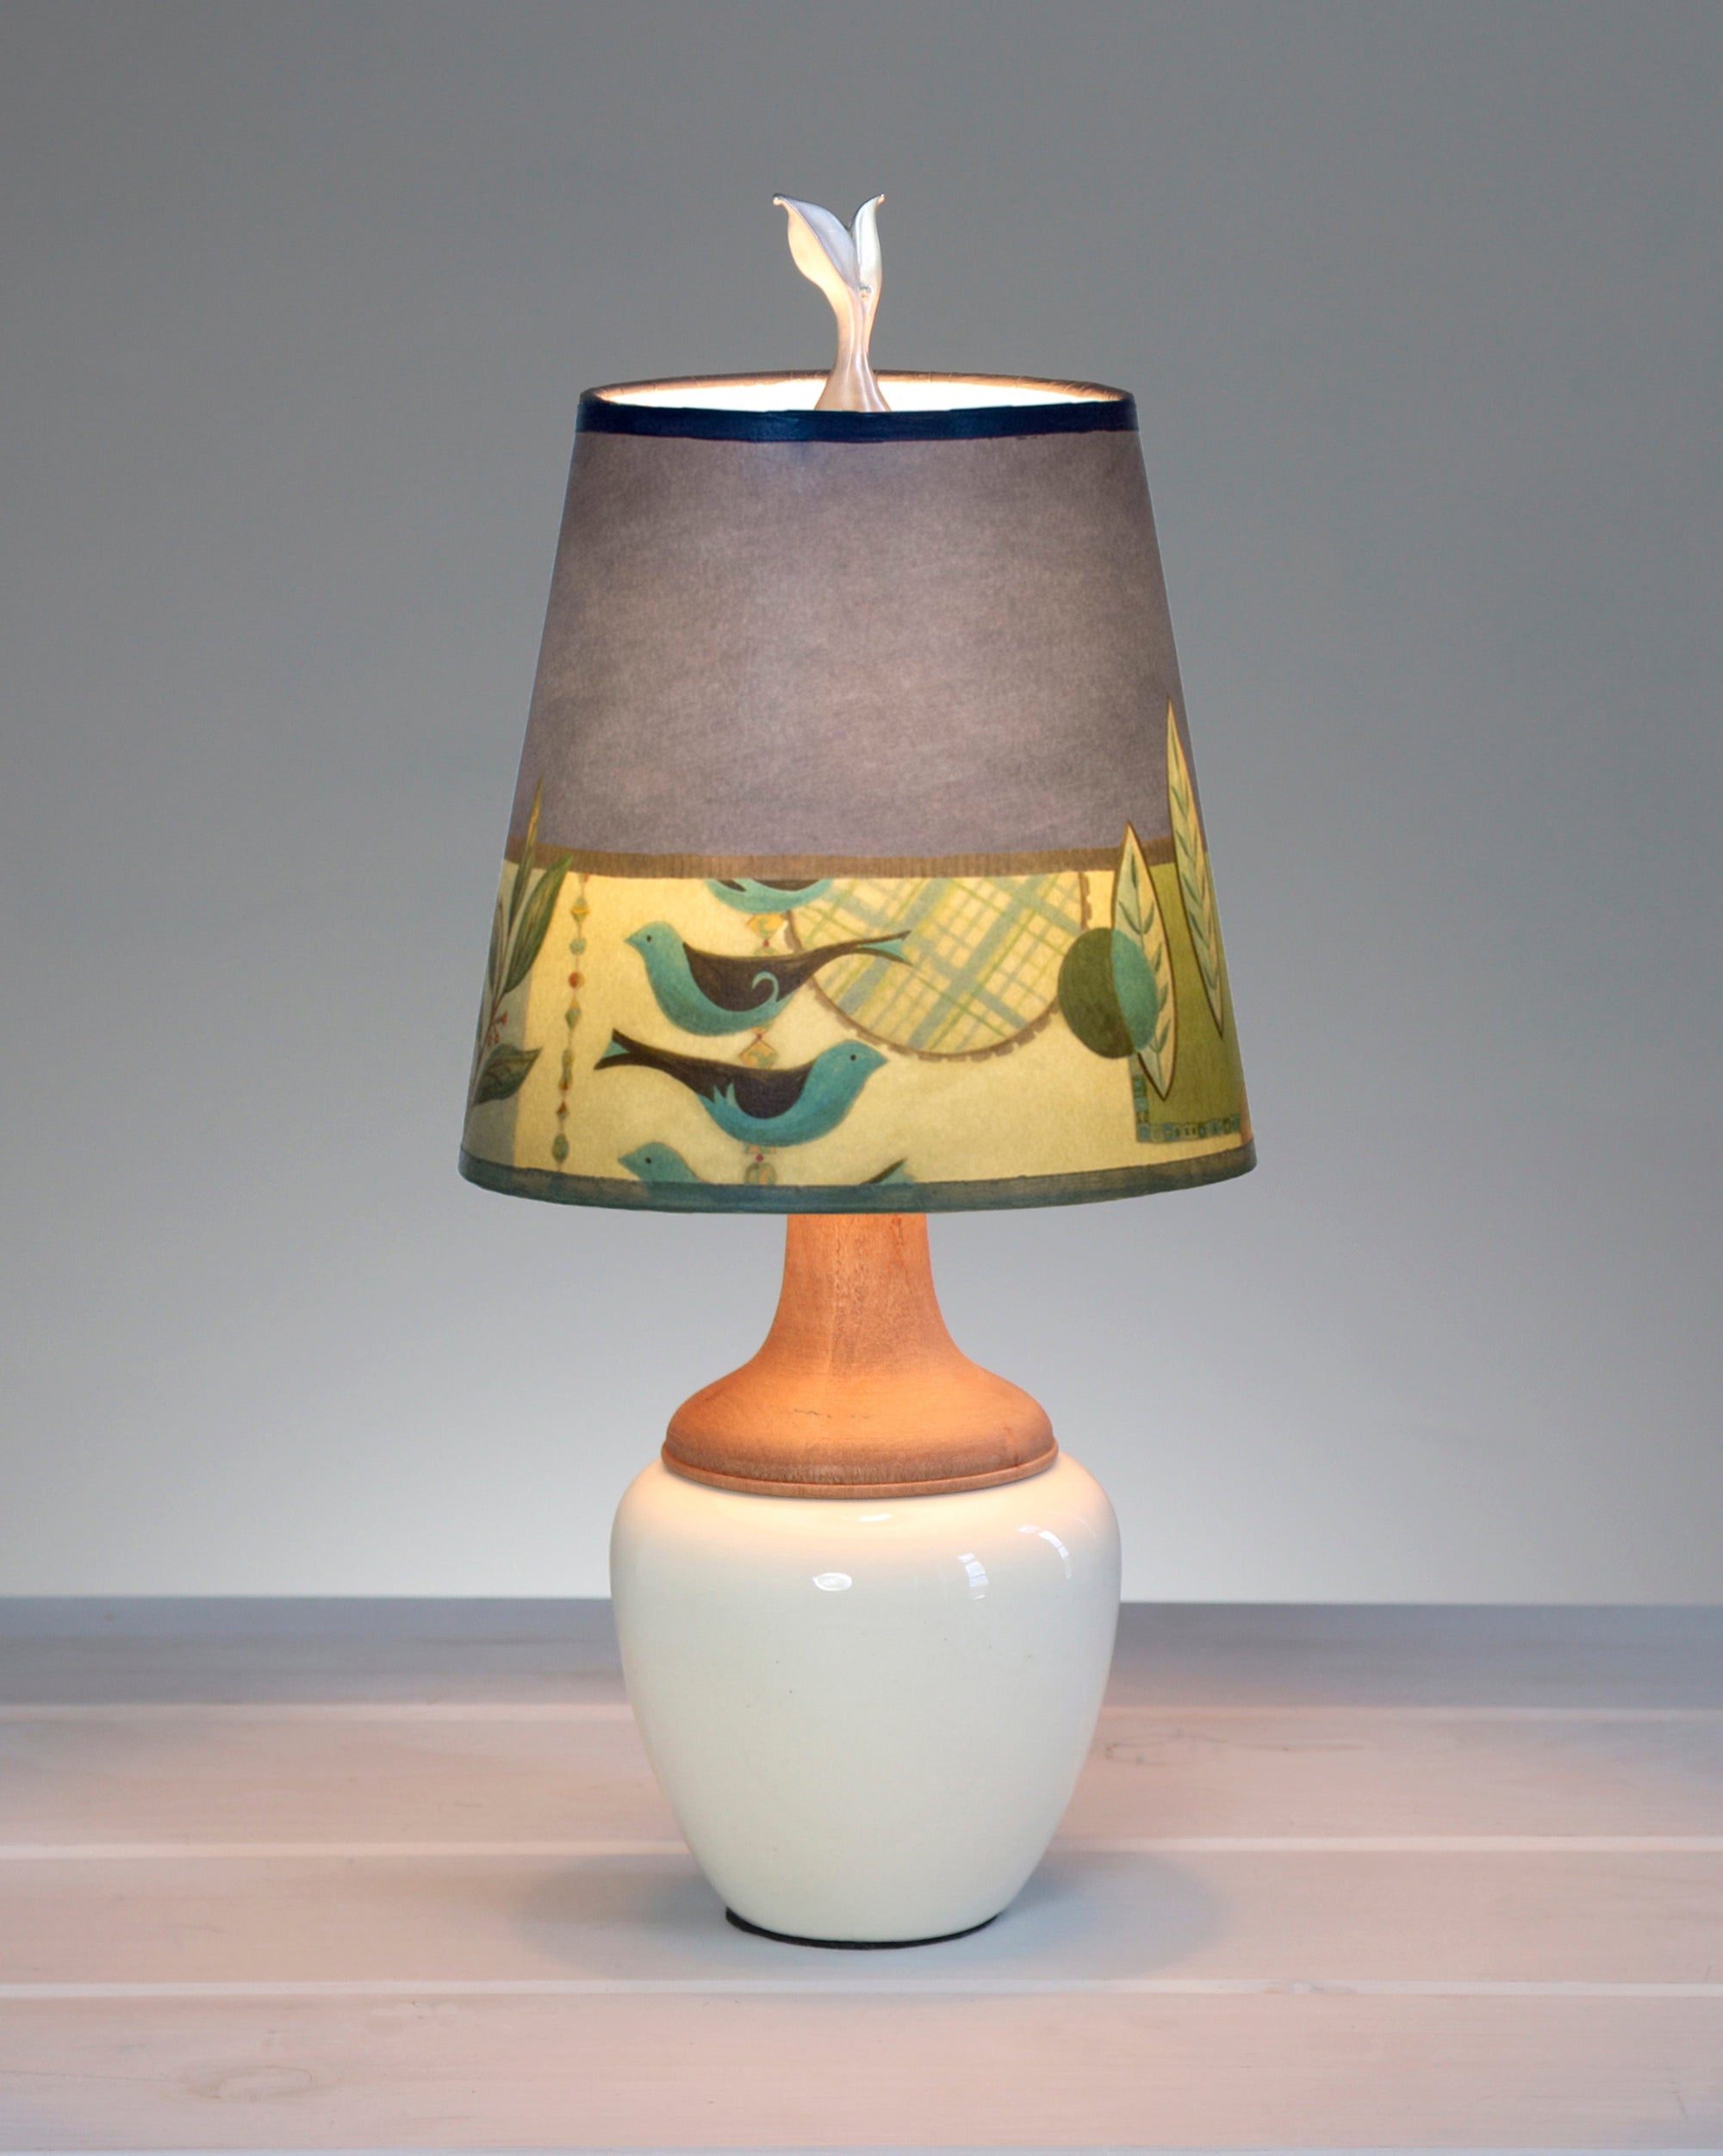 Janna Ugone & Co Table Lamps Ceramic and Maple Table Lamp in Ivory Gloss with Small Drum Shade in New Capri Periwinkle